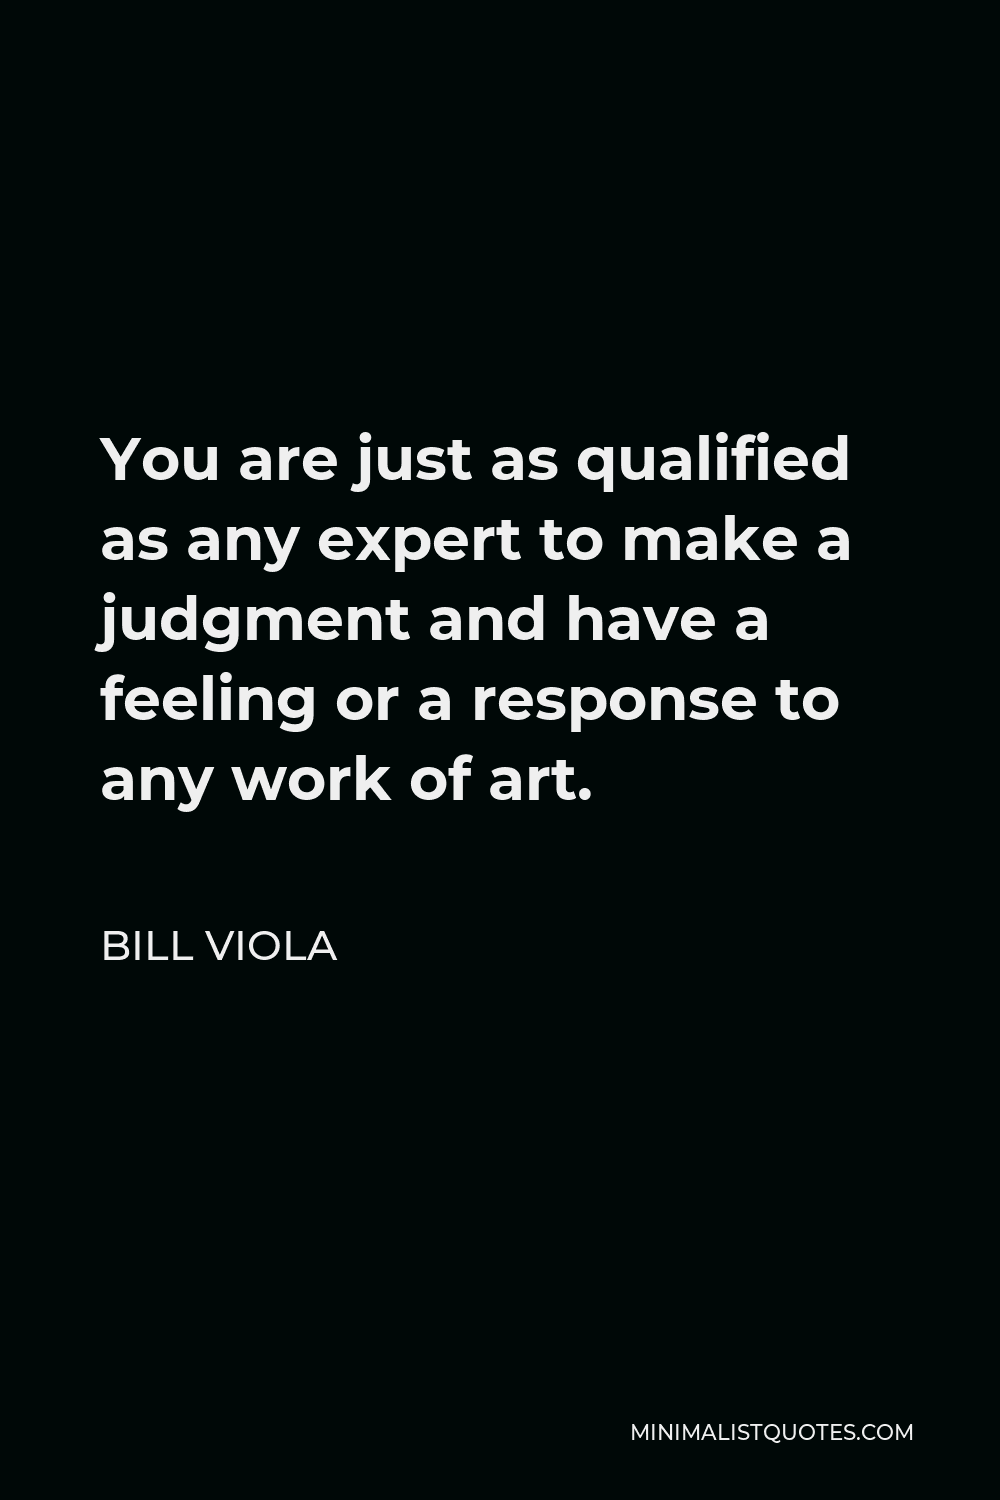 Bill Viola Quote - You are just as qualified as any expert to make a judgment and have a feeling or a response to any work of art.